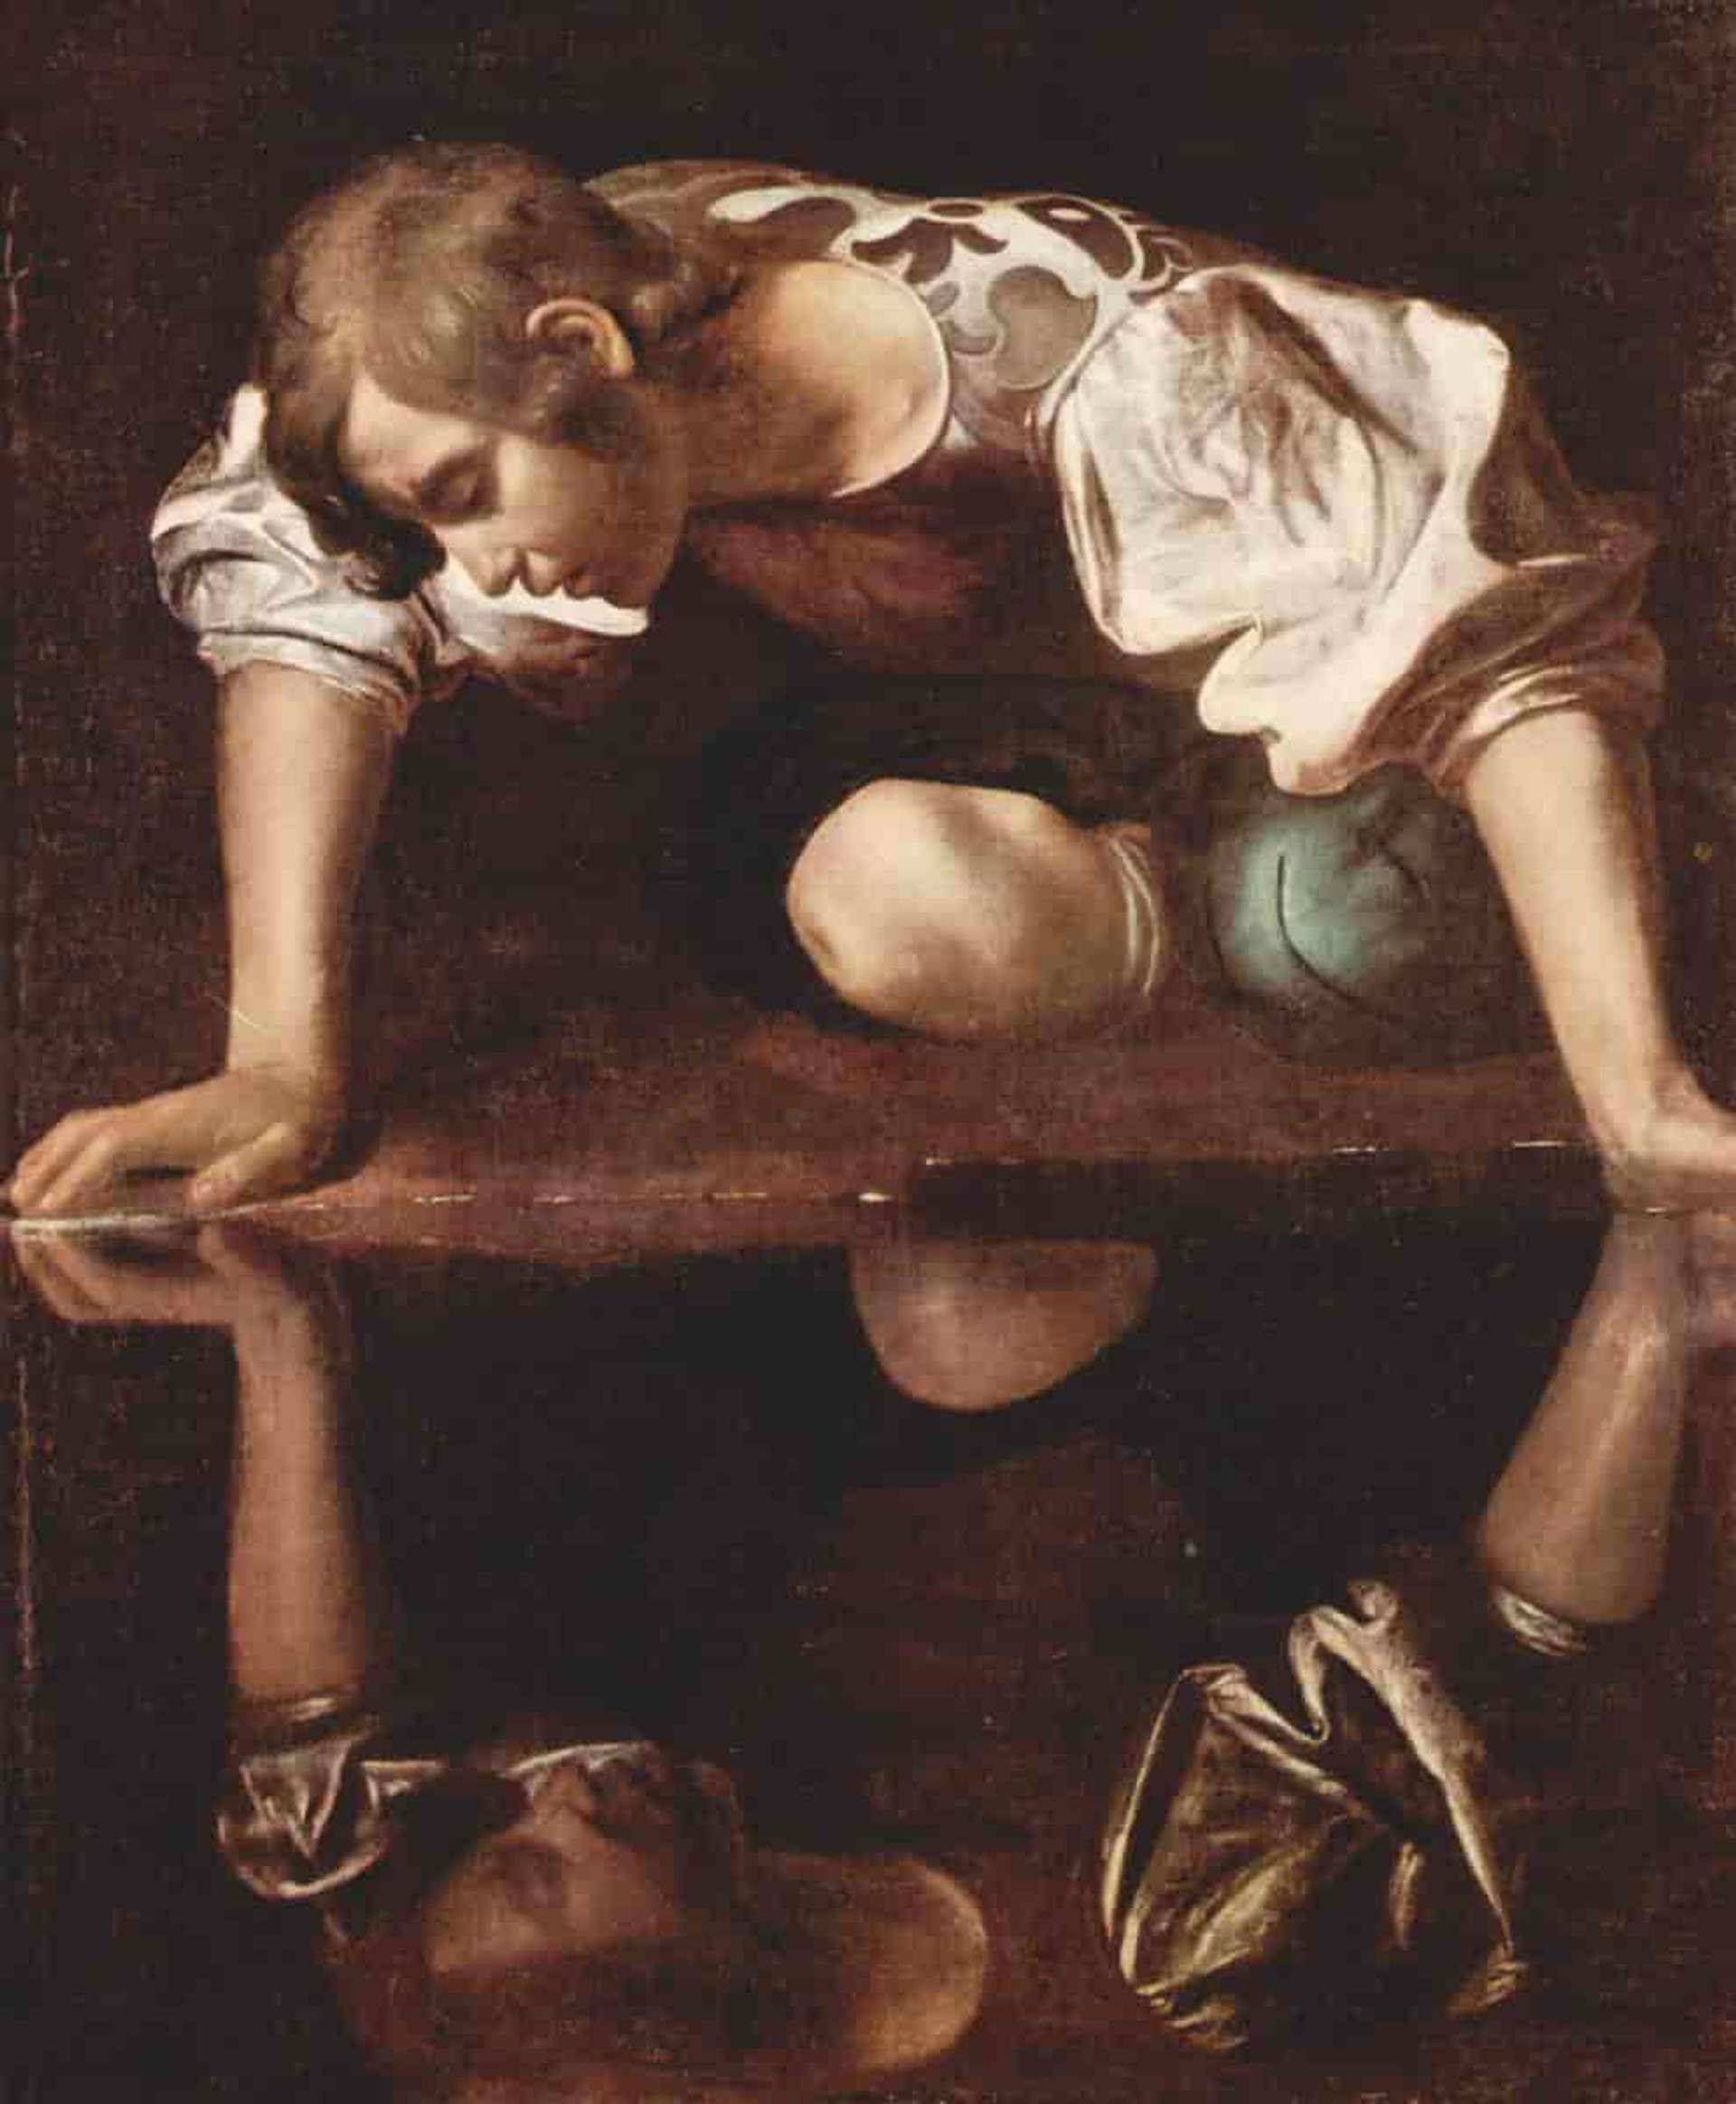 An image of the painting Narcissus by Caravaggio, showing a man who is in love with his own reflection in a pond of water.